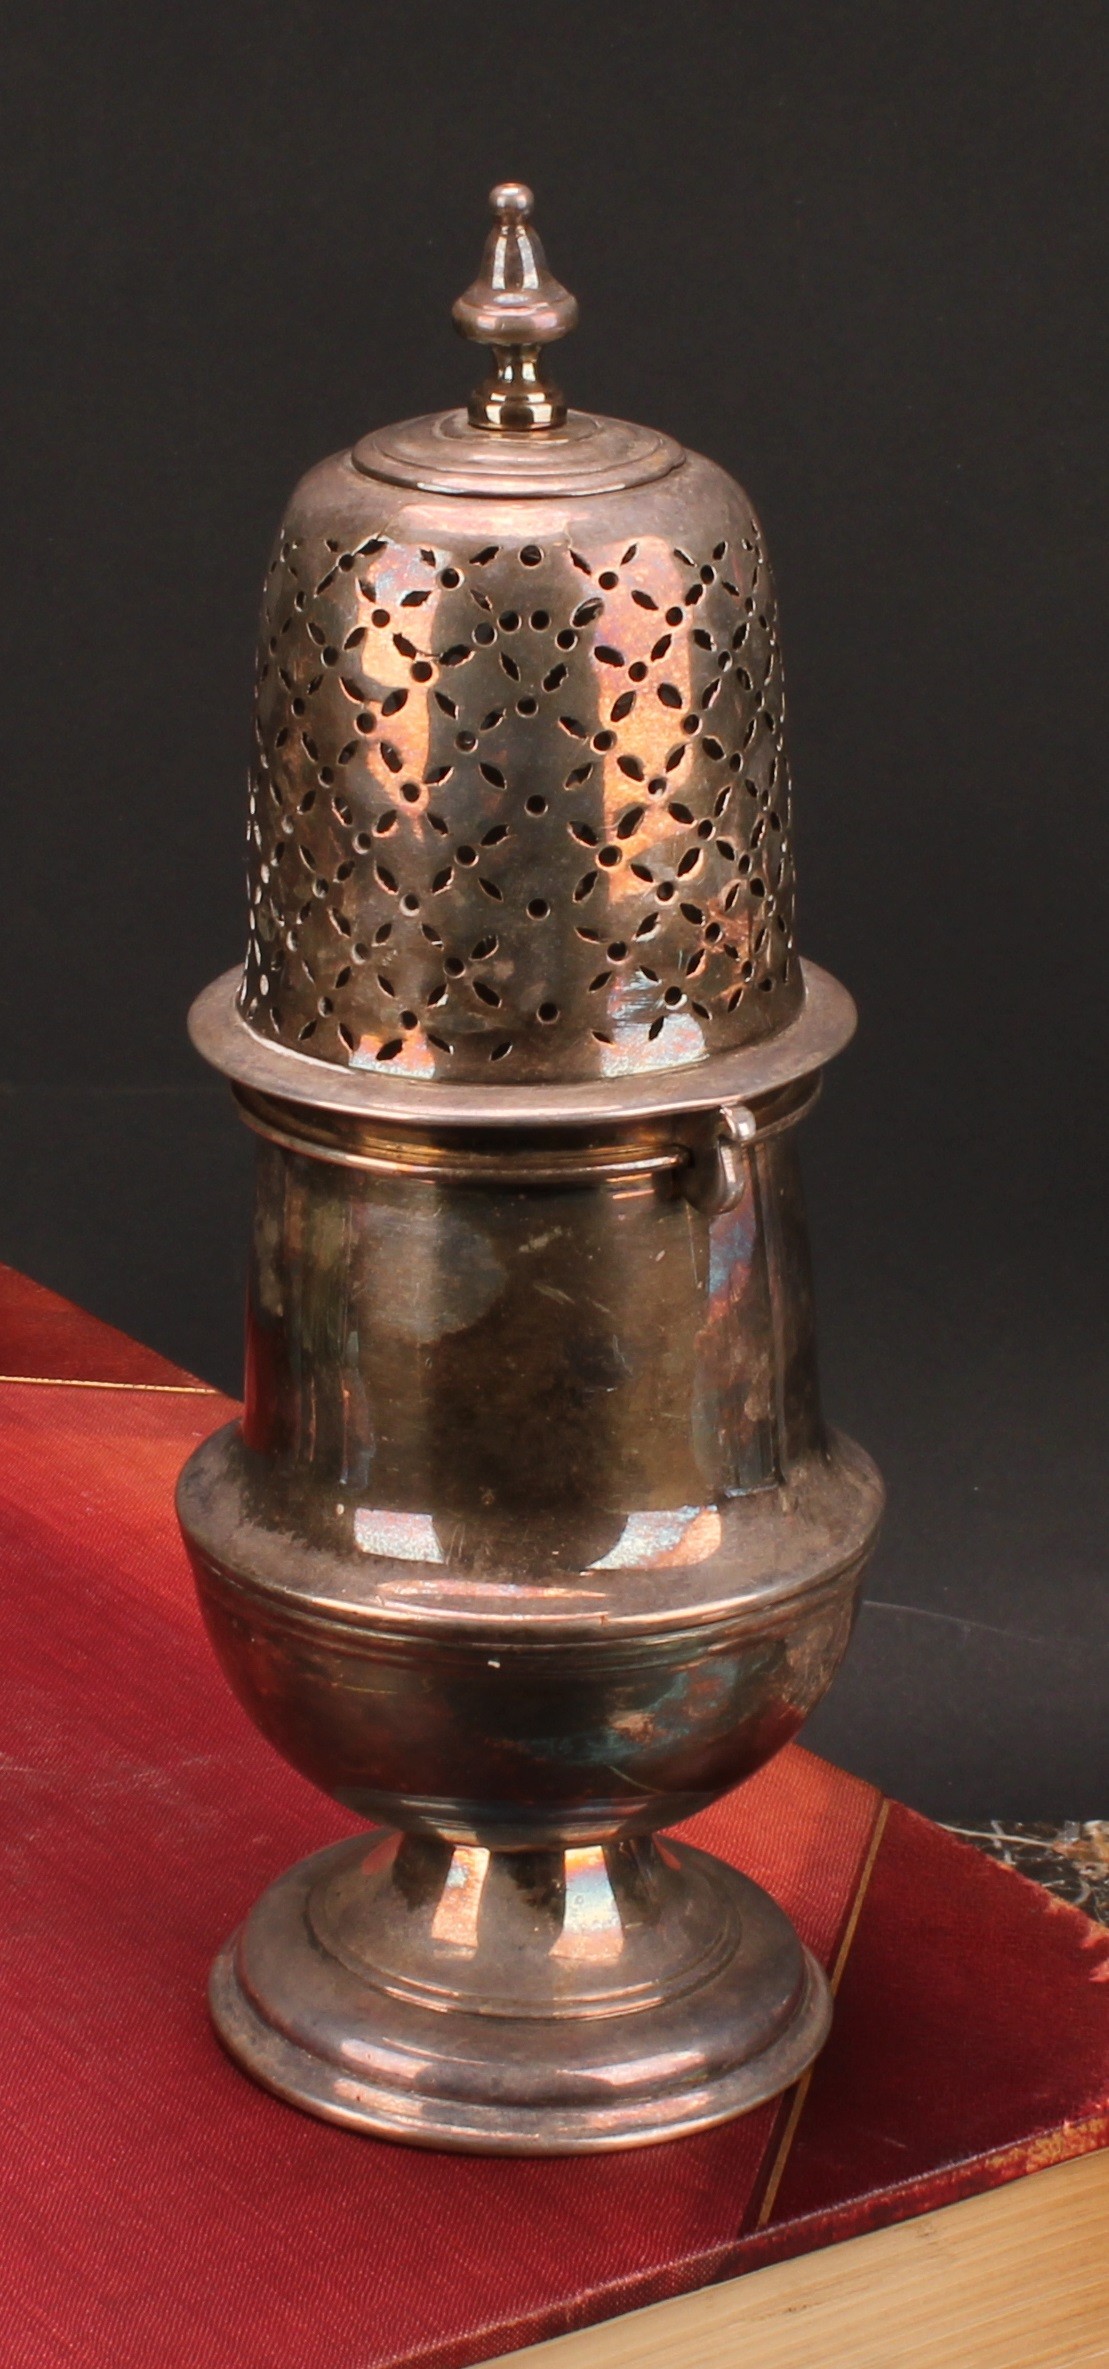 An 18th century 'Teutonic' German silver plate or paktong baluster sugar caster, knop finial,